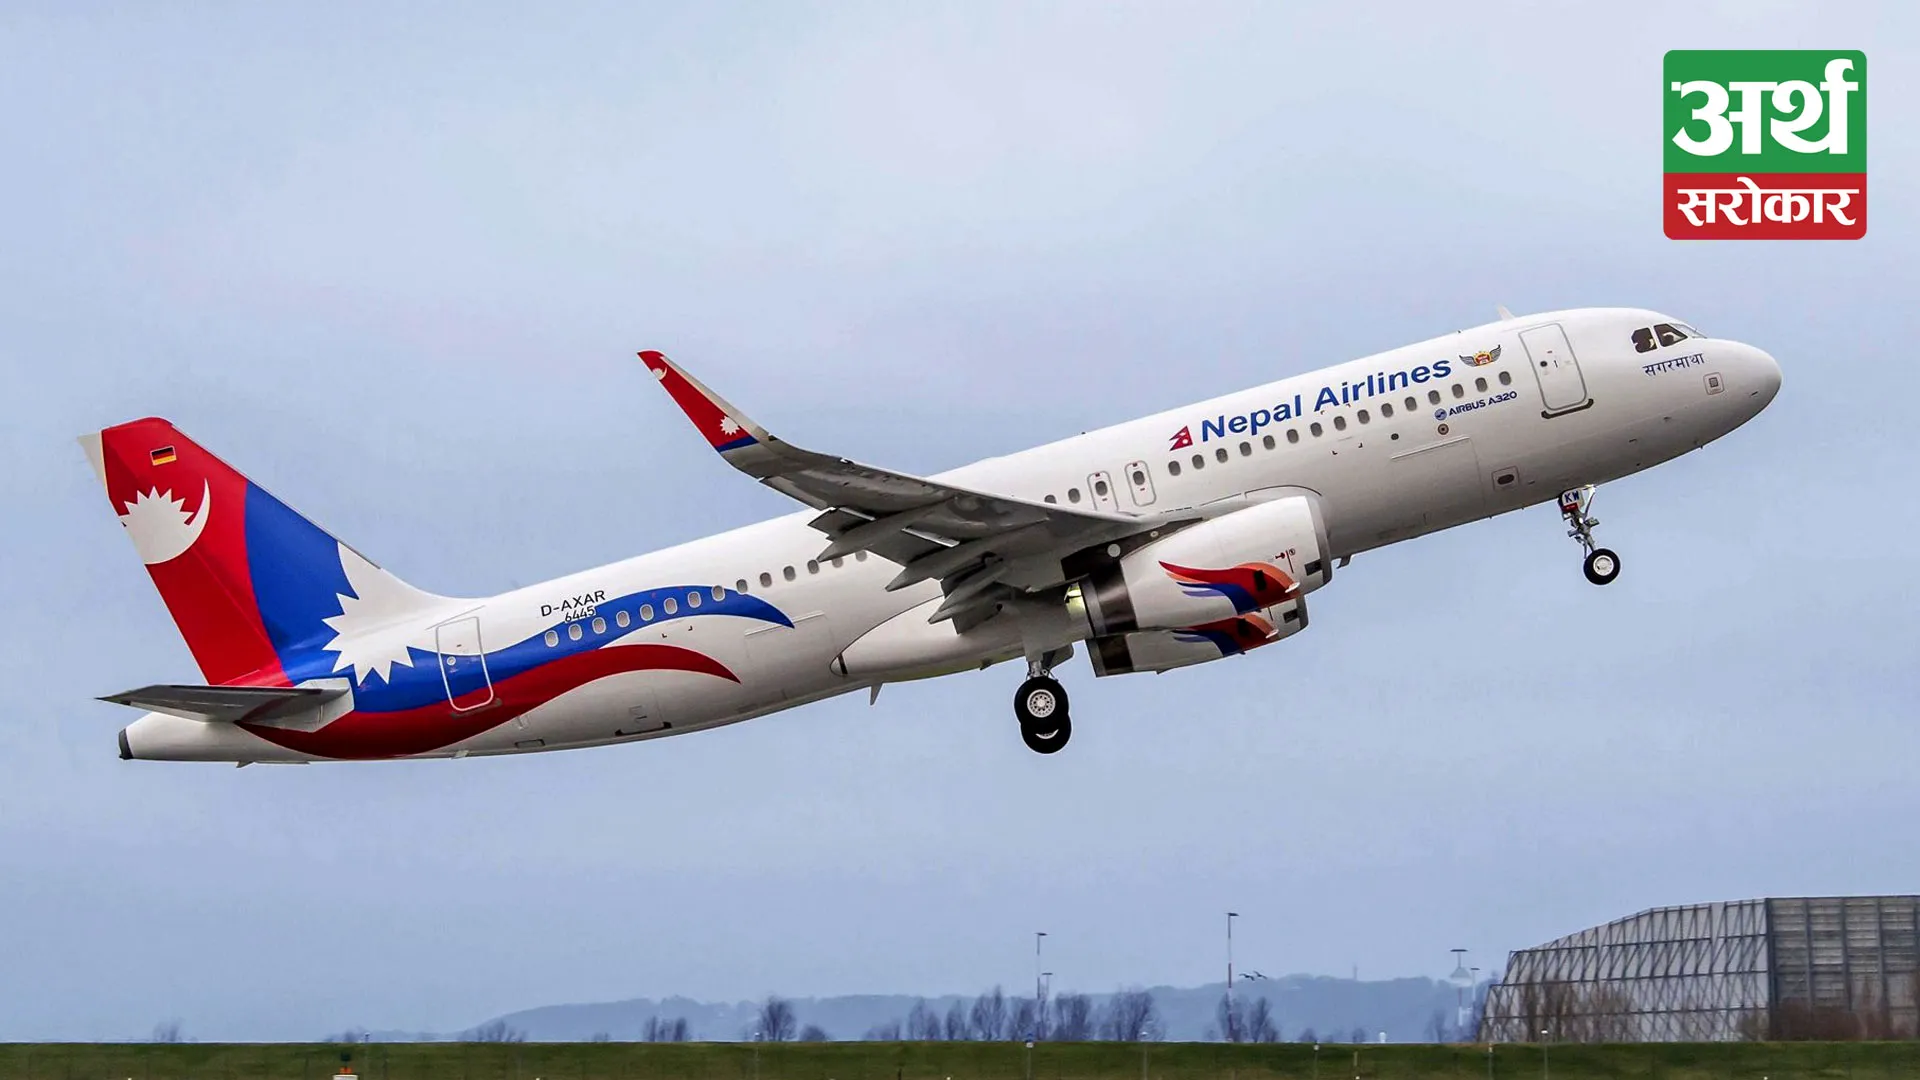 Nepal Airlines Repays Loan for Aircraft Purchase, Plans to Expand Services, and Promotes Tourism